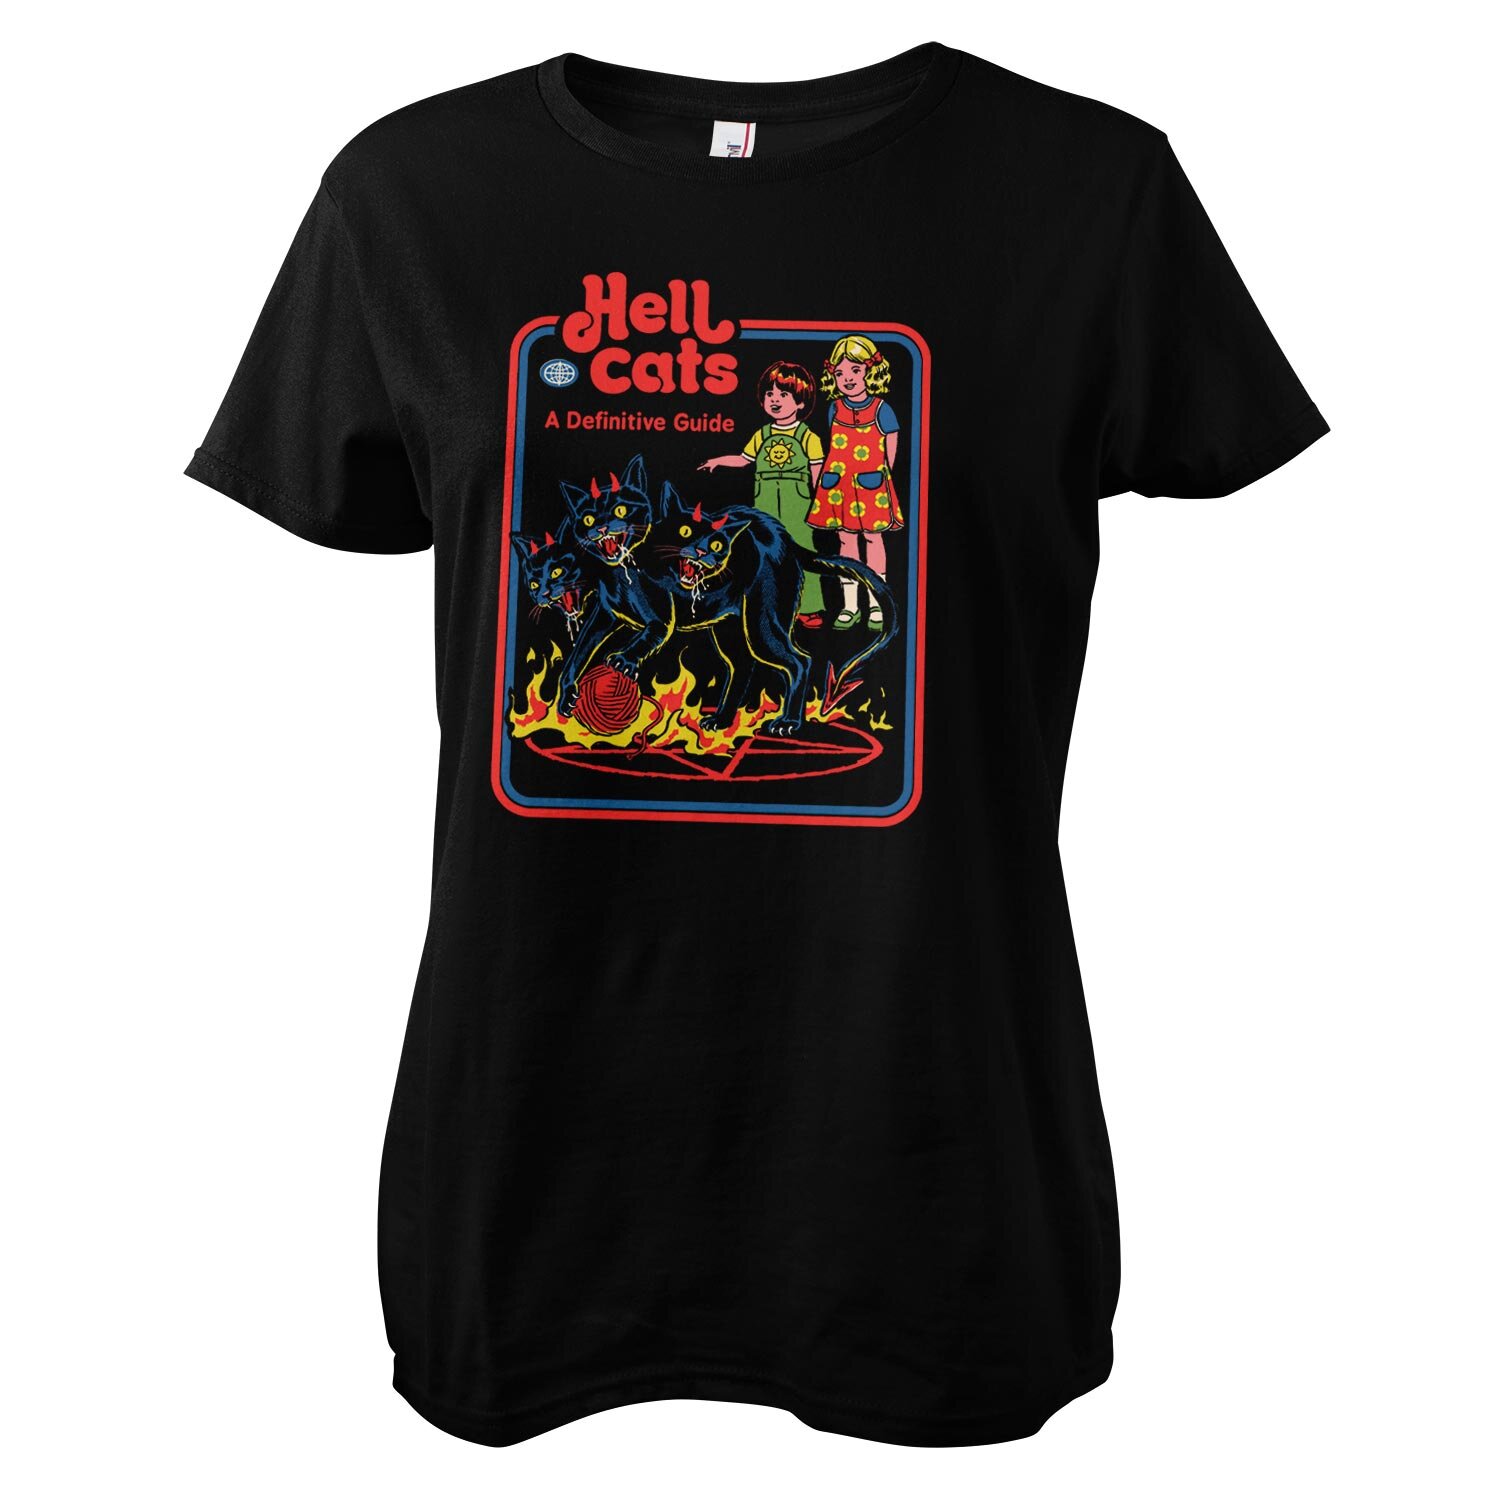 Hell Cats - A Definitive Guide Girly Tee